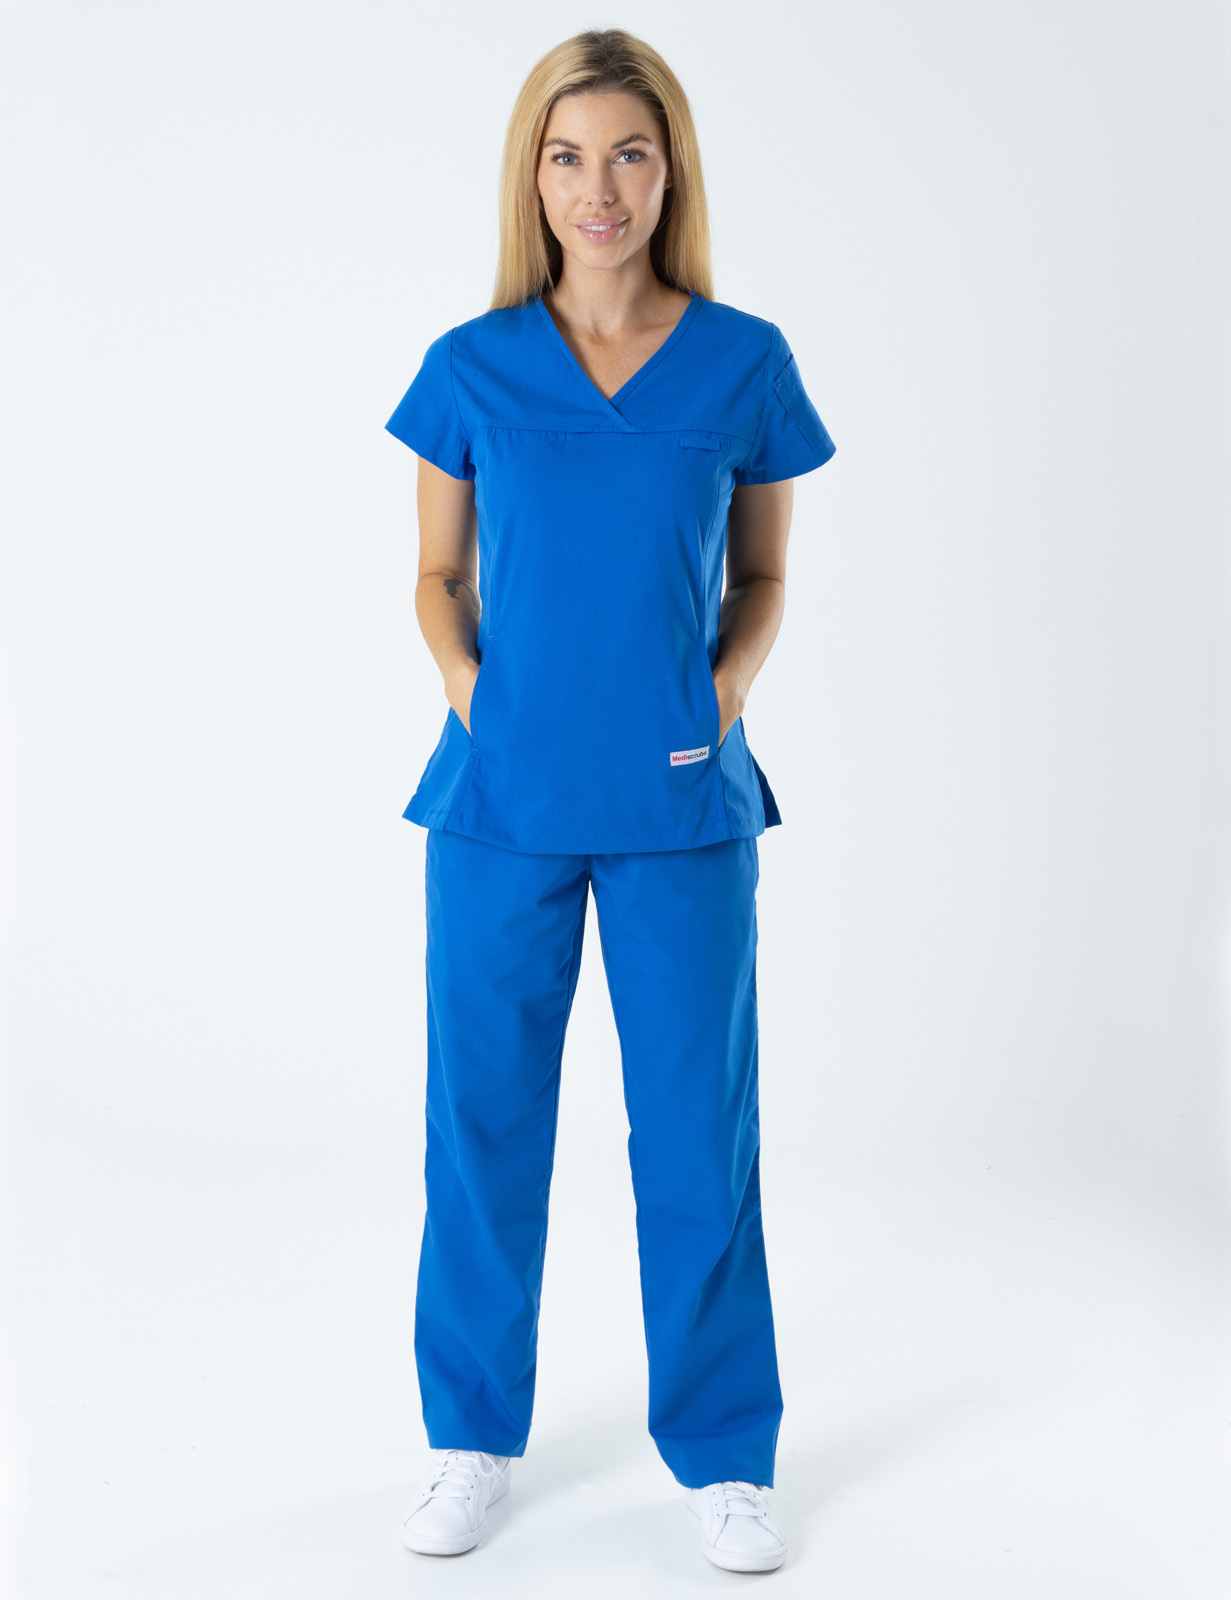 Robina Hospital - Respiratory Scientist (Women's Fit Solid Scrub Top and Cargo Pants in Royal incl Logos)